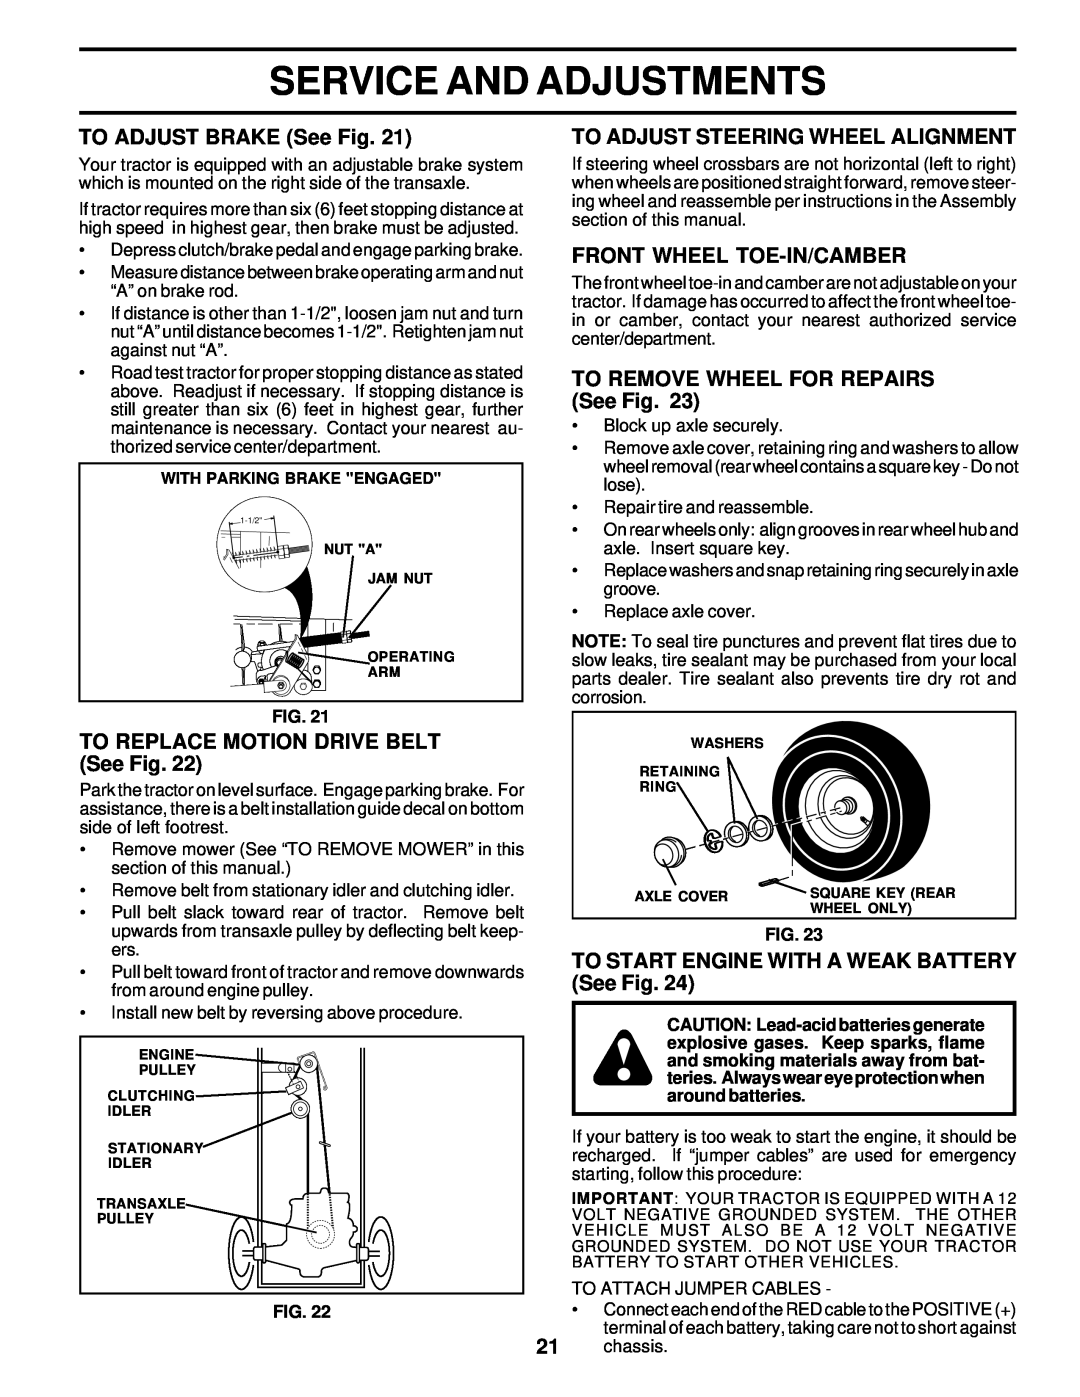 Weed Eater 171883 manual TO ADJUST BRAKE See Fig, TO REPLACE MOTION DRIVE BELT See Fig, To Adjust Steering Wheel Alignment 